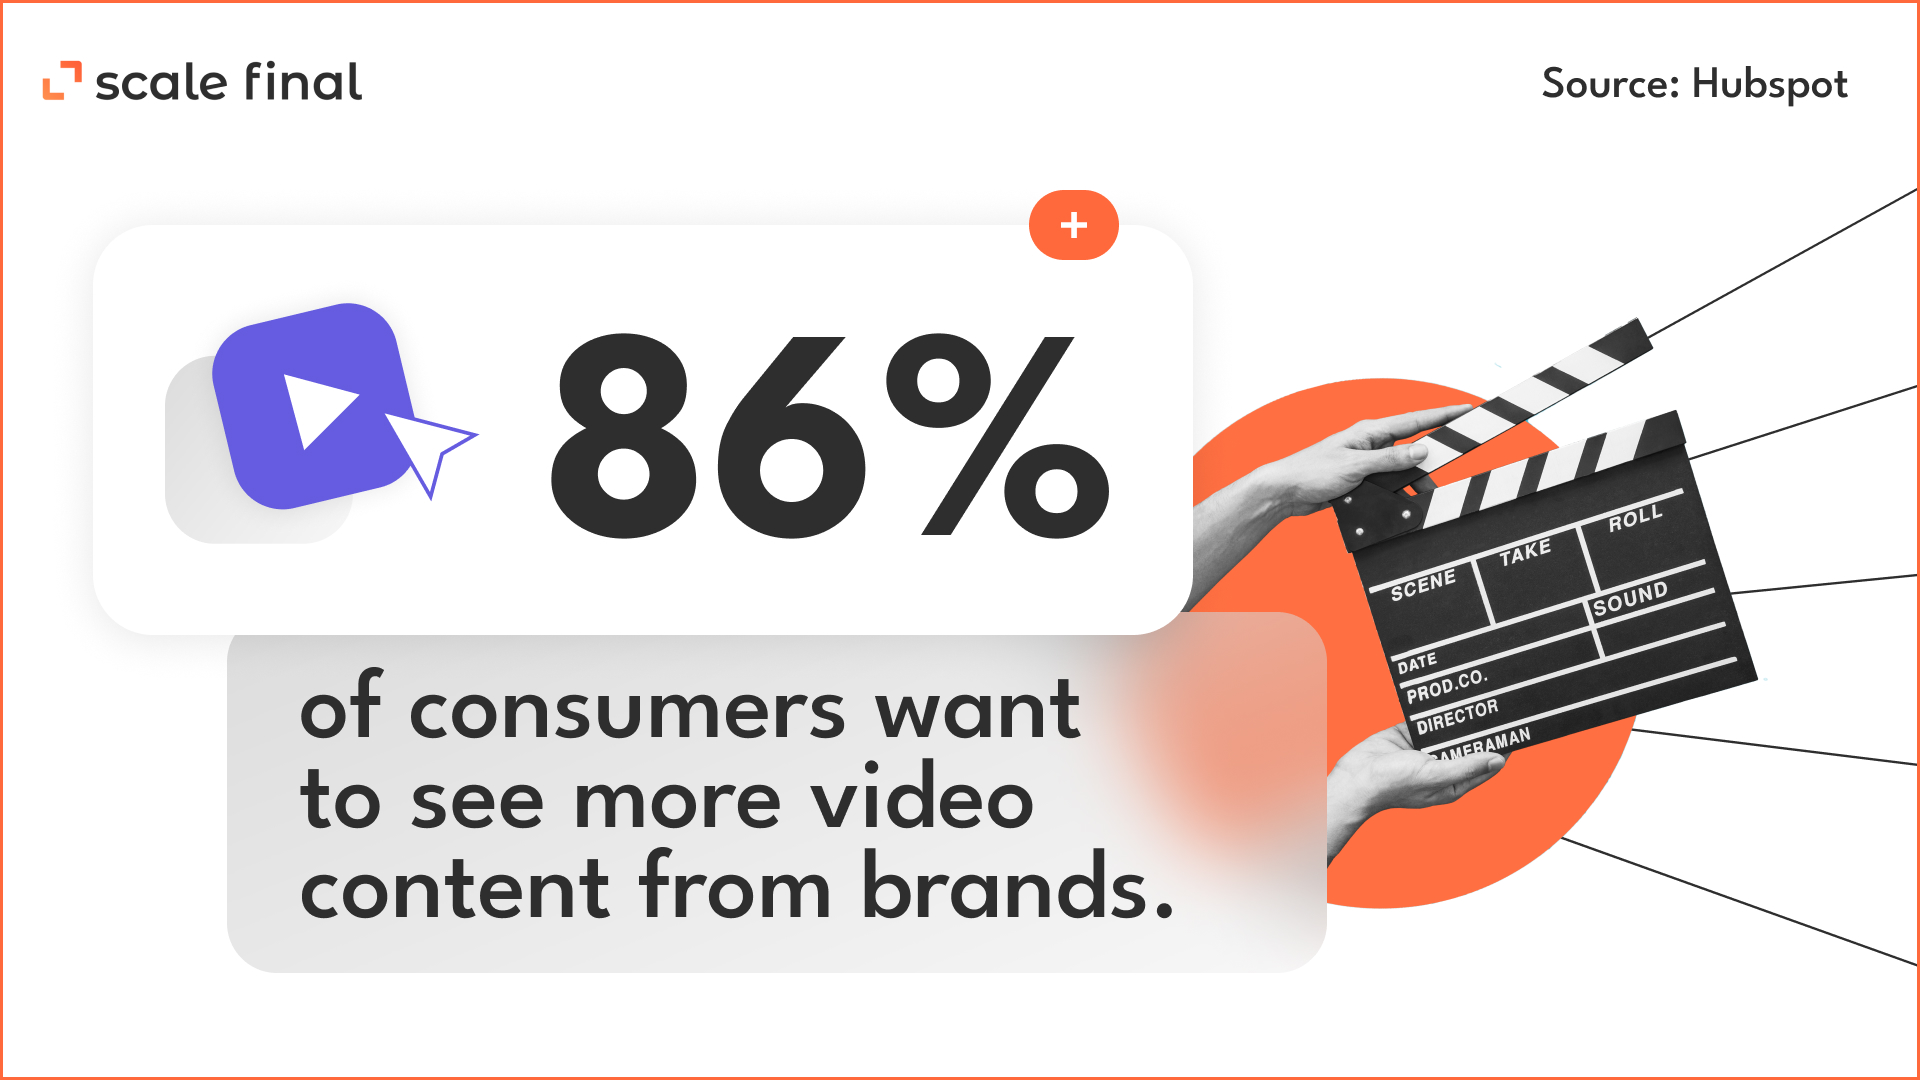 86% of consumers want to see more video content from brands.source Hubspot